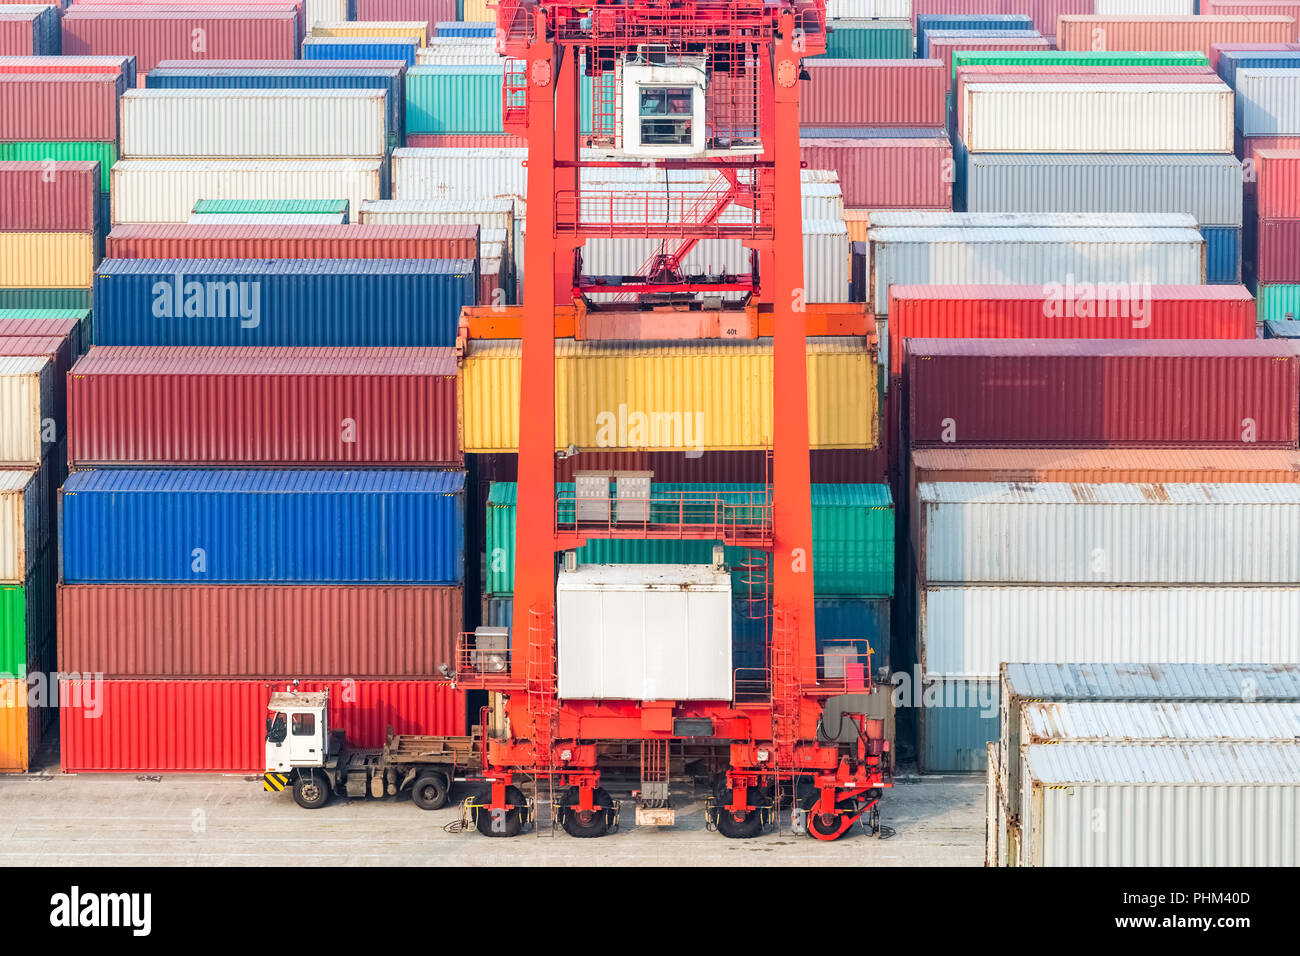 Container Freight Station Stockfoto